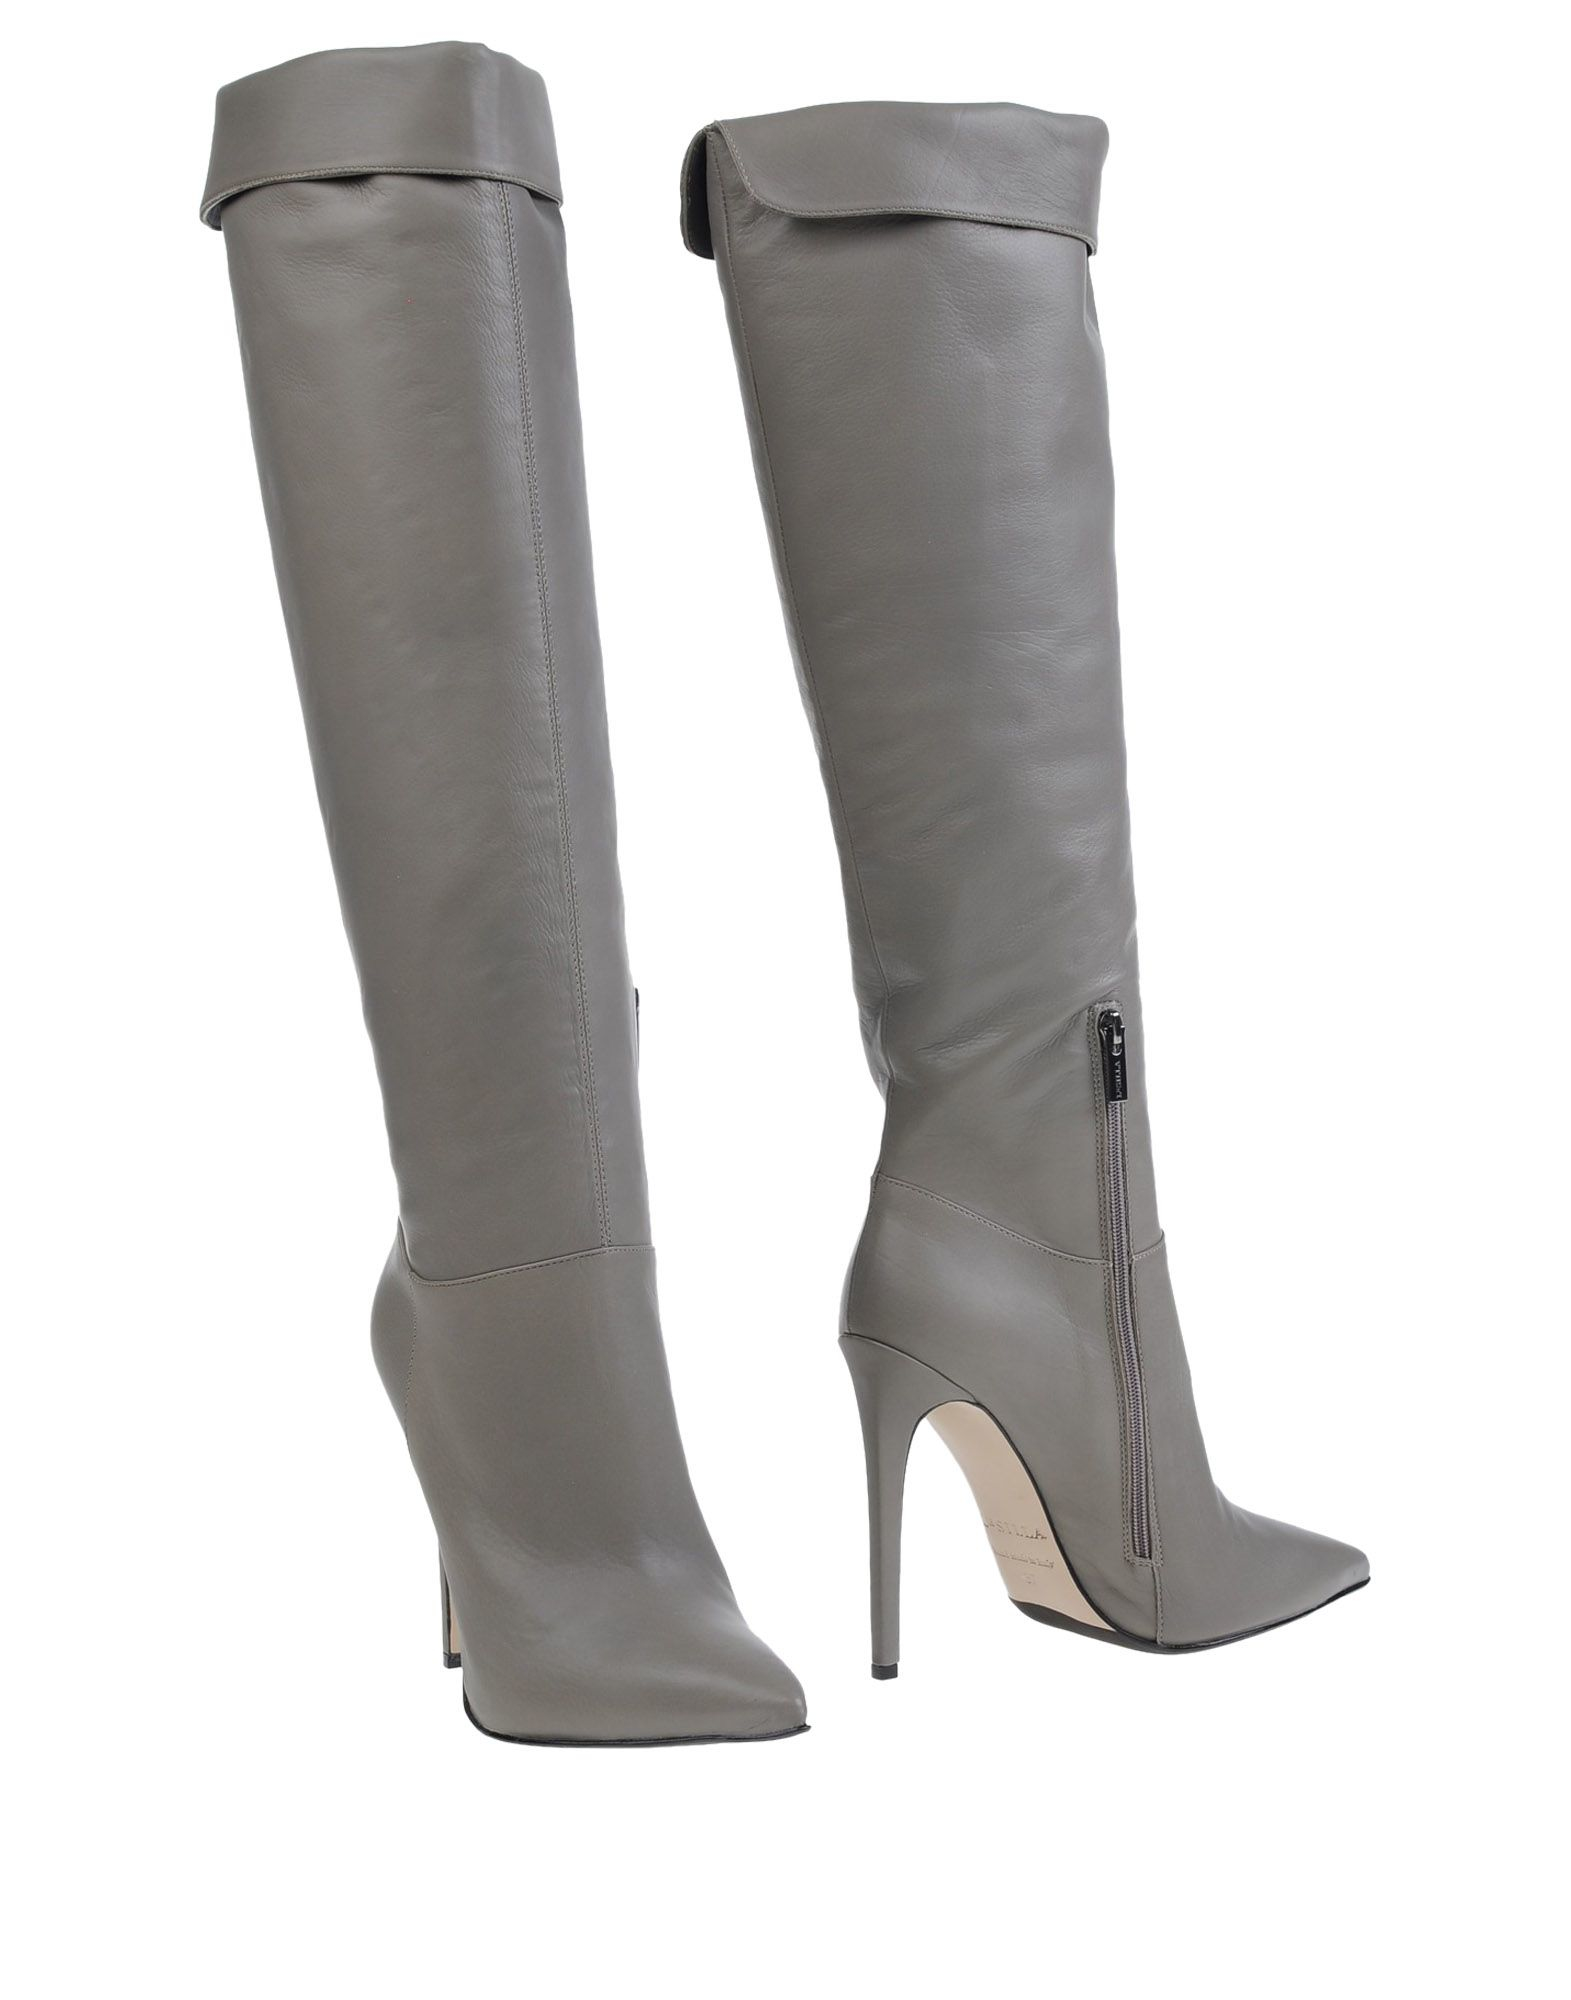 Le Silla Boots in Light Grey (Gray) - Lyst